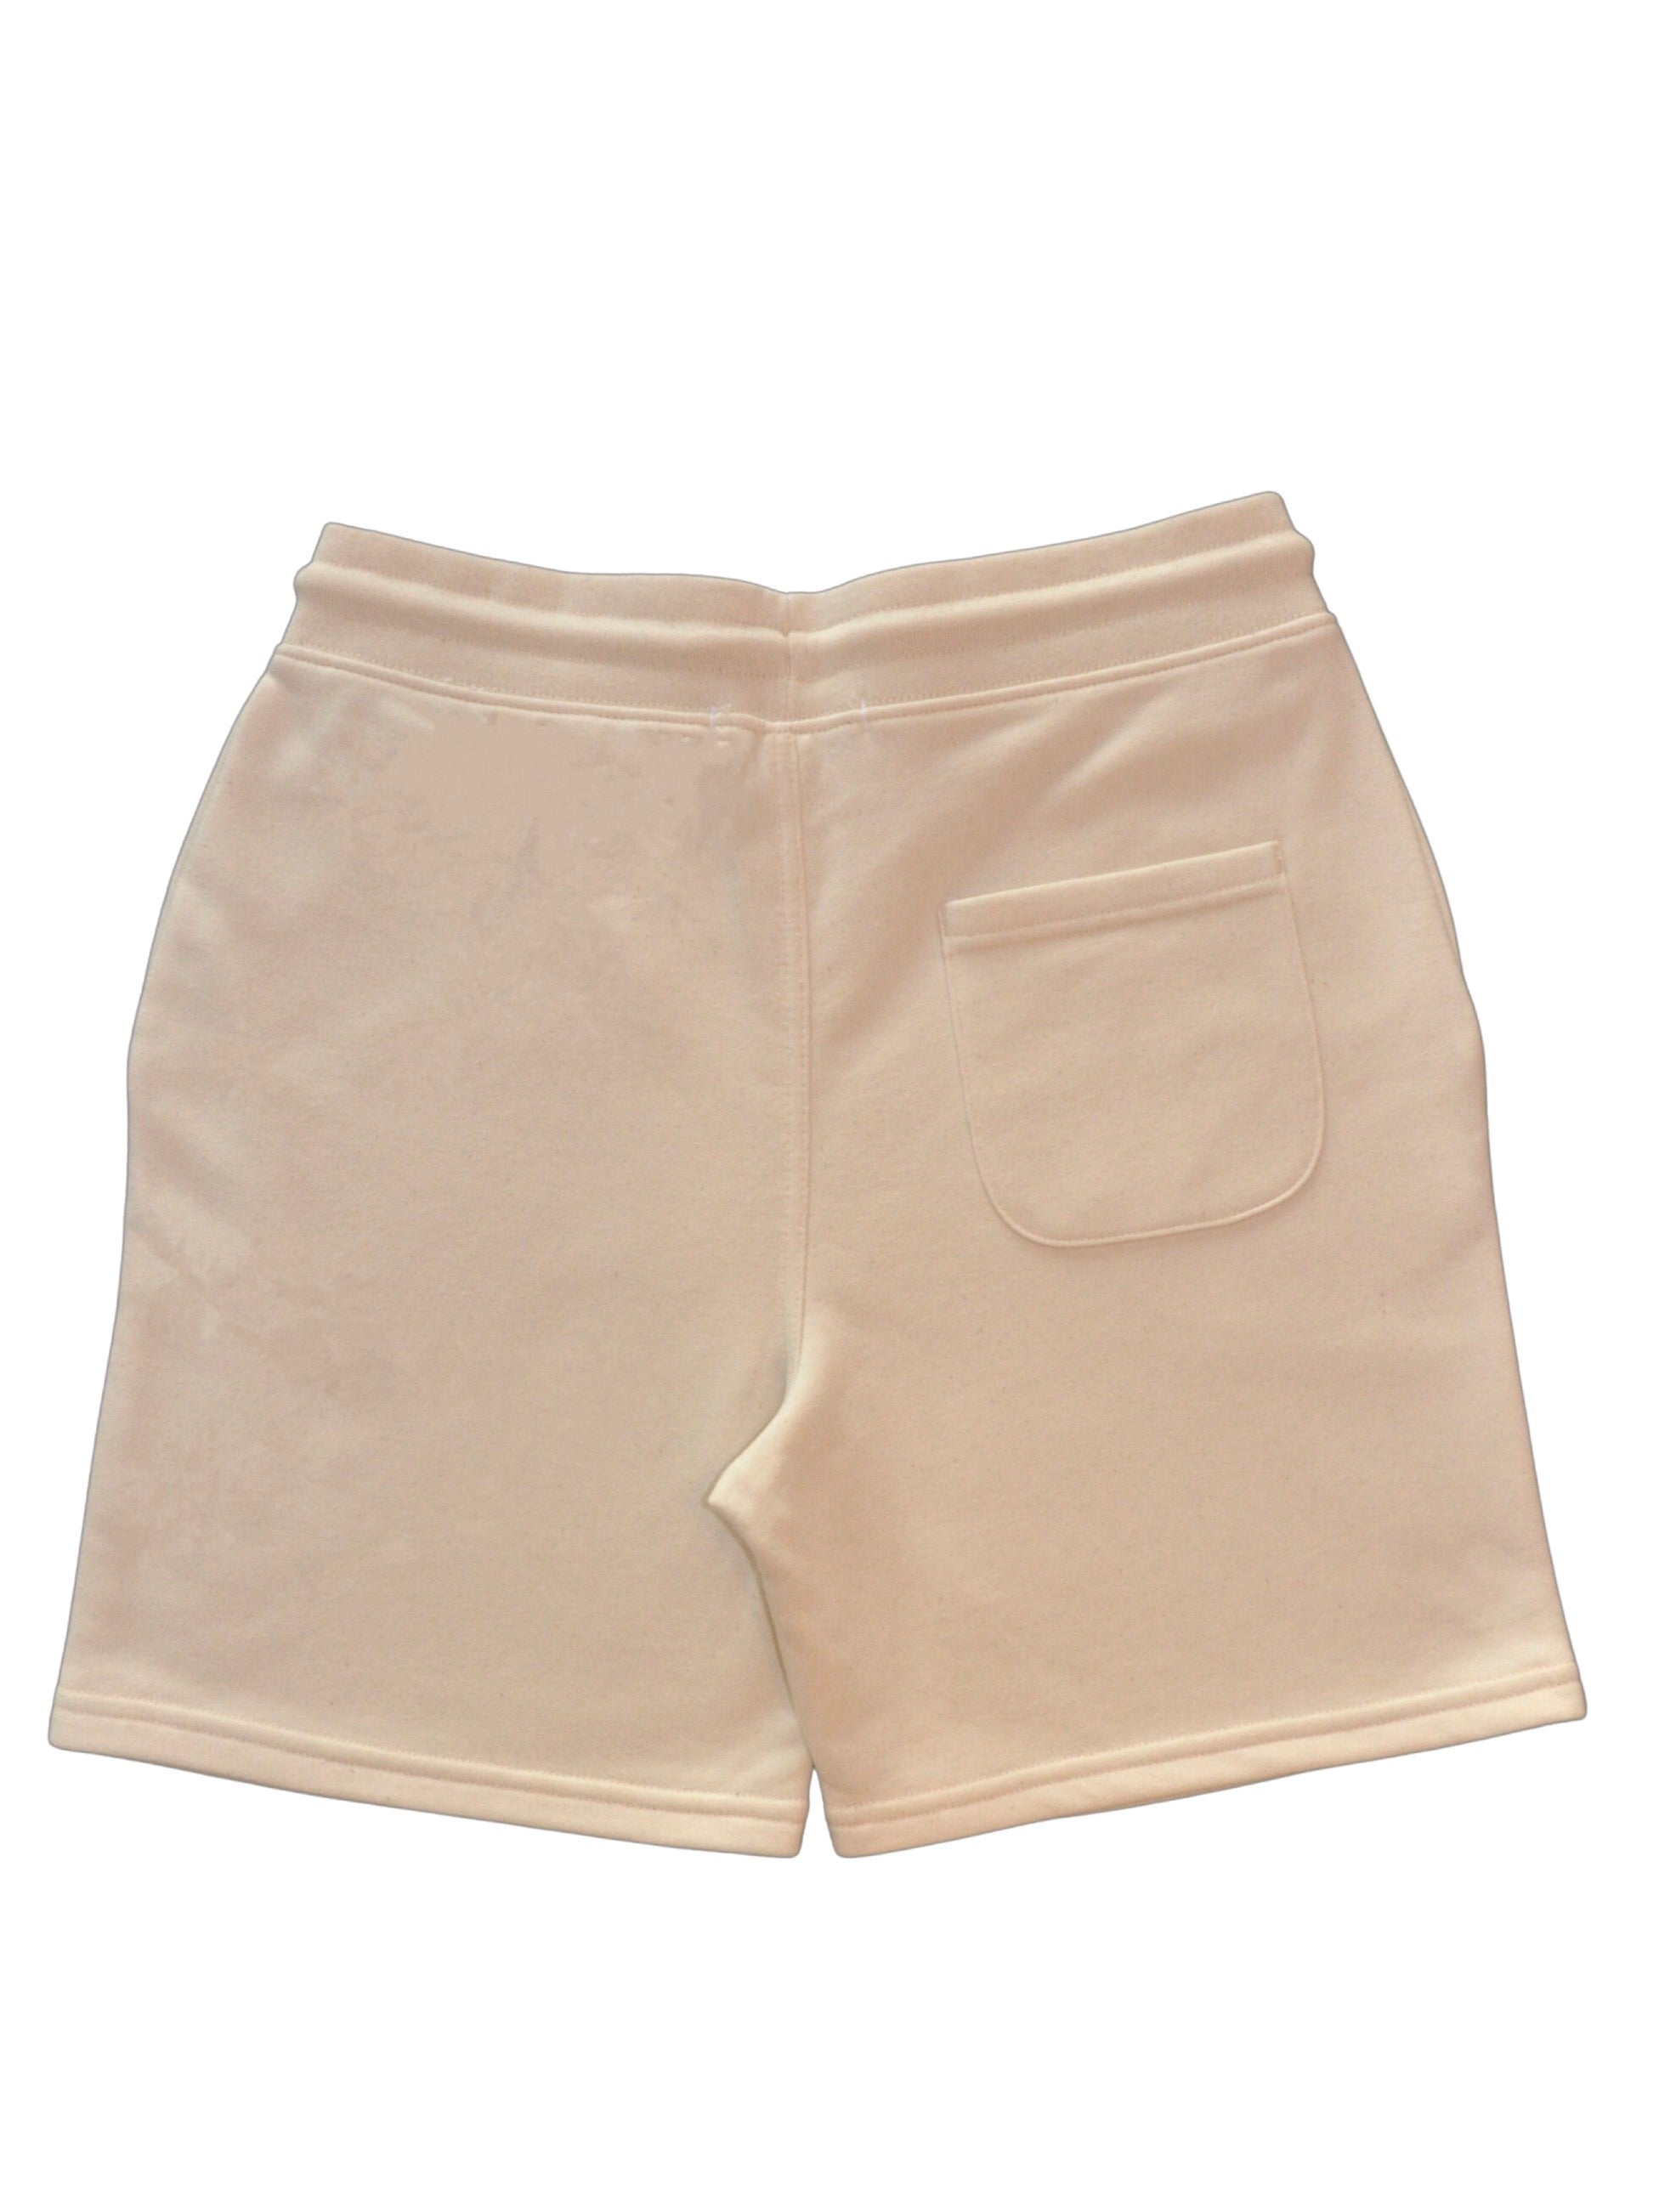 BY11 Organic Cotton Embroidered Track Shorts - Natural